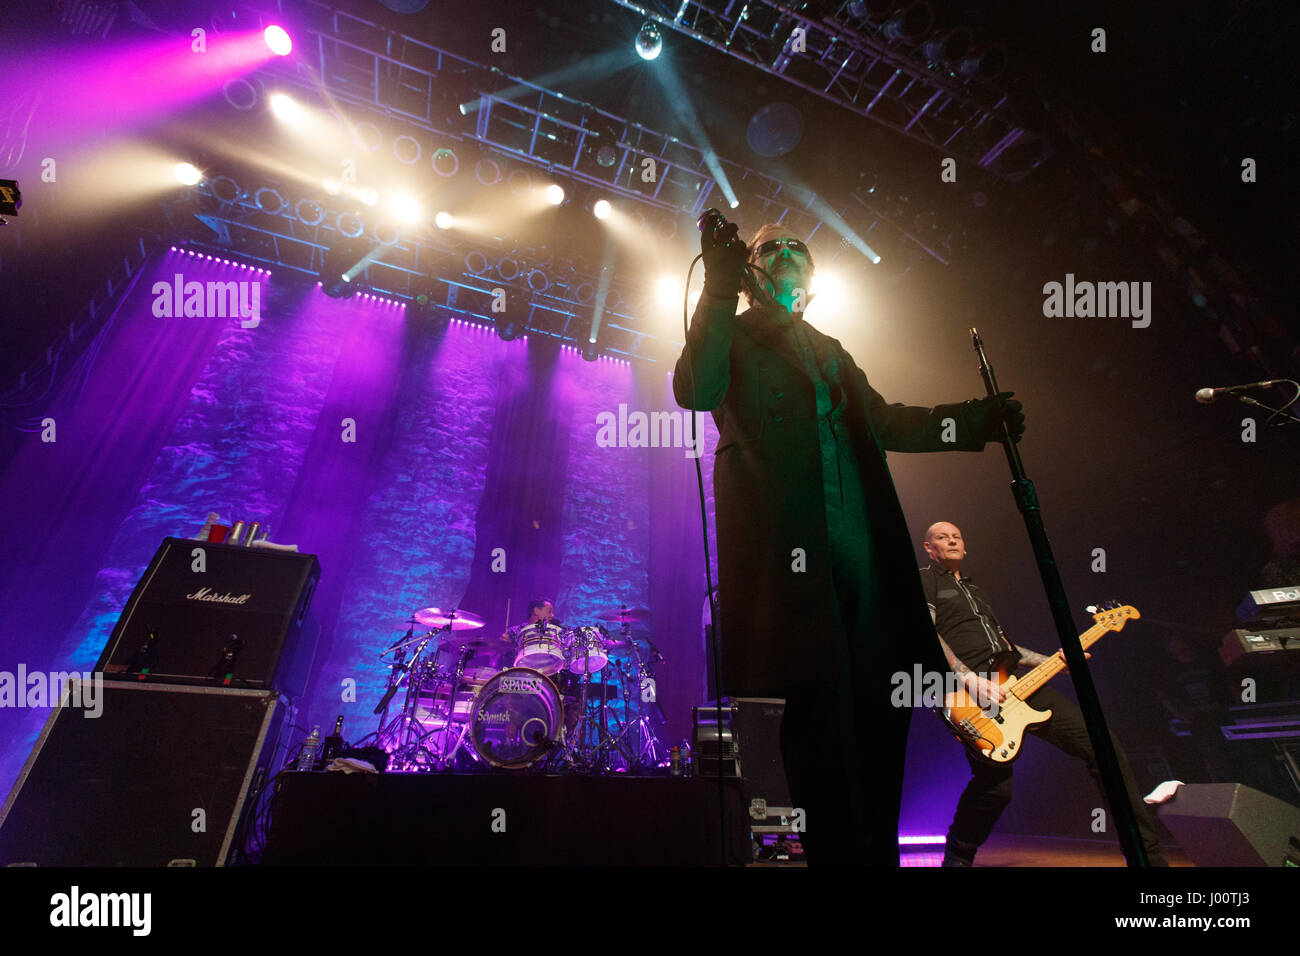 San Diego, California. April 7, 2017. Originally formed in 1976 in London, The Damned performs at the House of Blues during their 40th anniversary tour. Singer Dave Vanion is backed by drummer Pinch and base player Stu West. Stock Photo